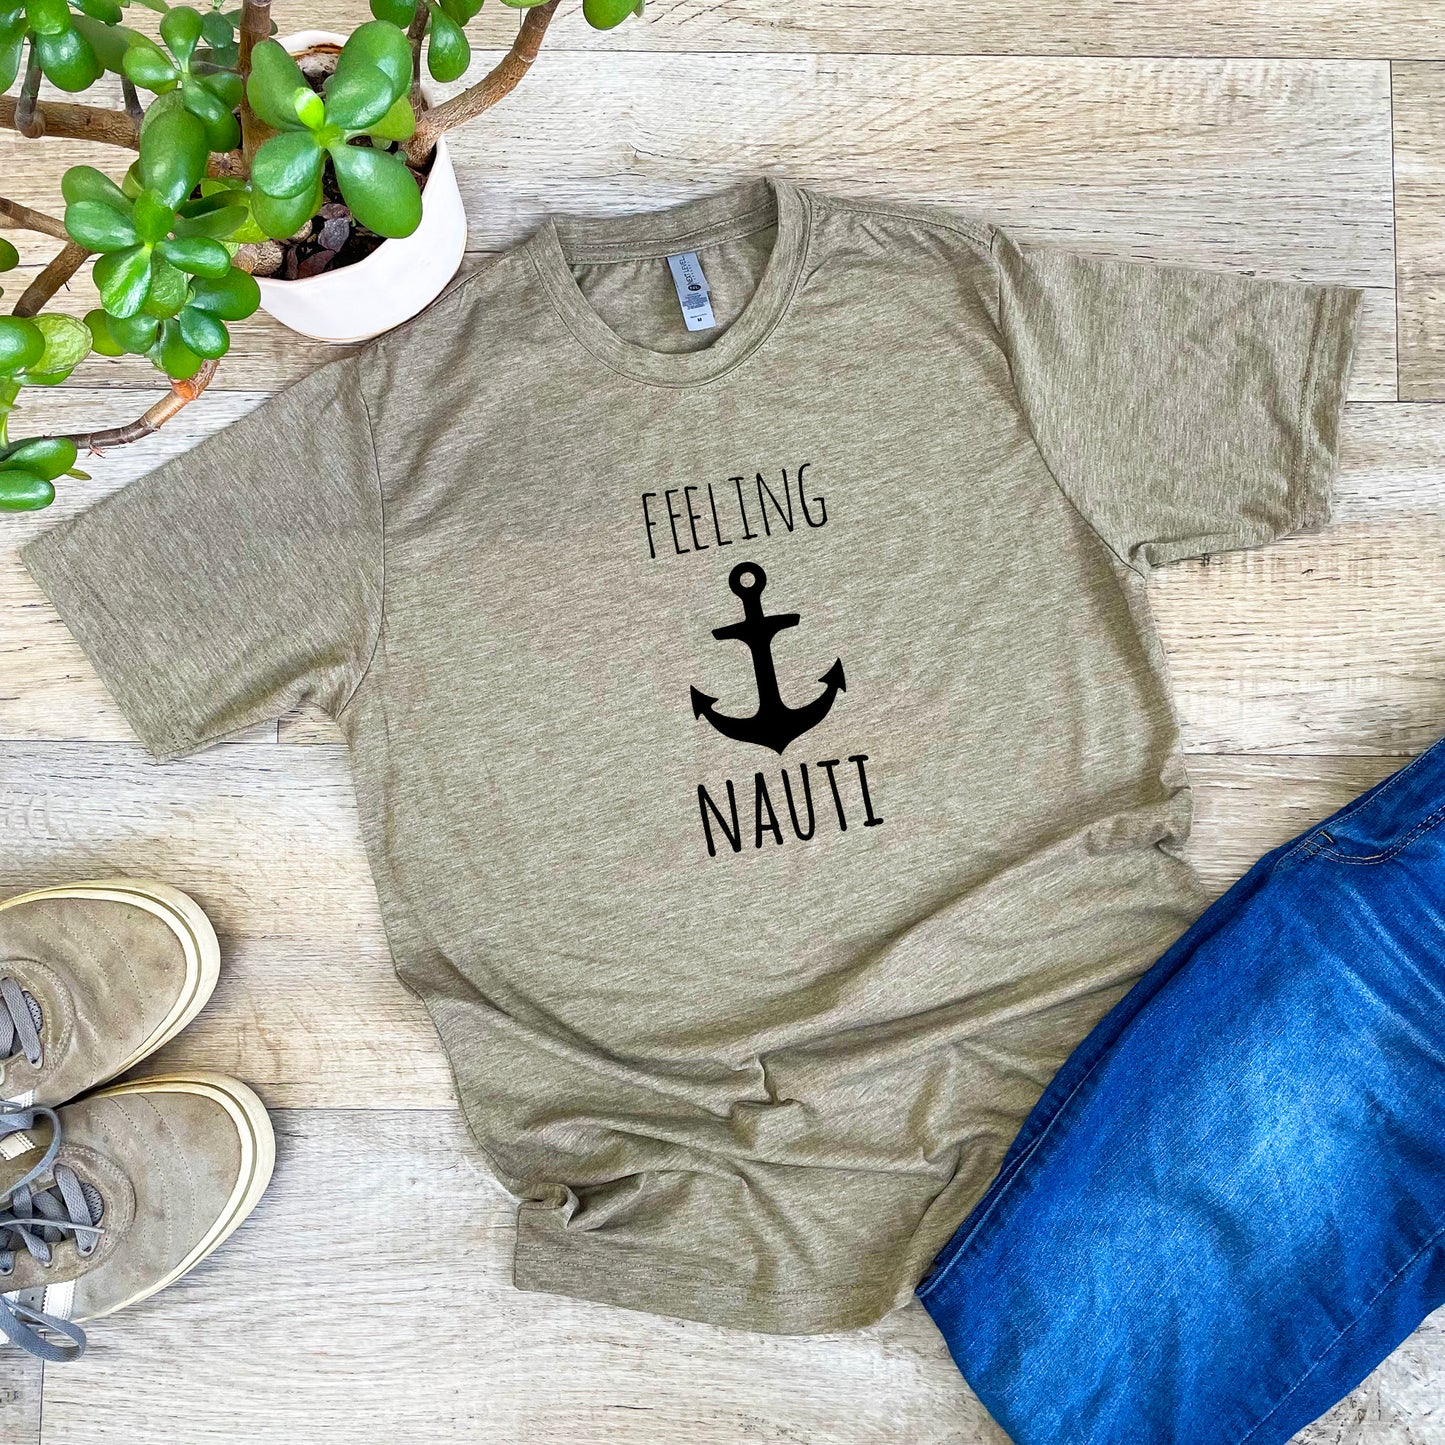 a t - shirt that says feeling nautit next to a potted plant